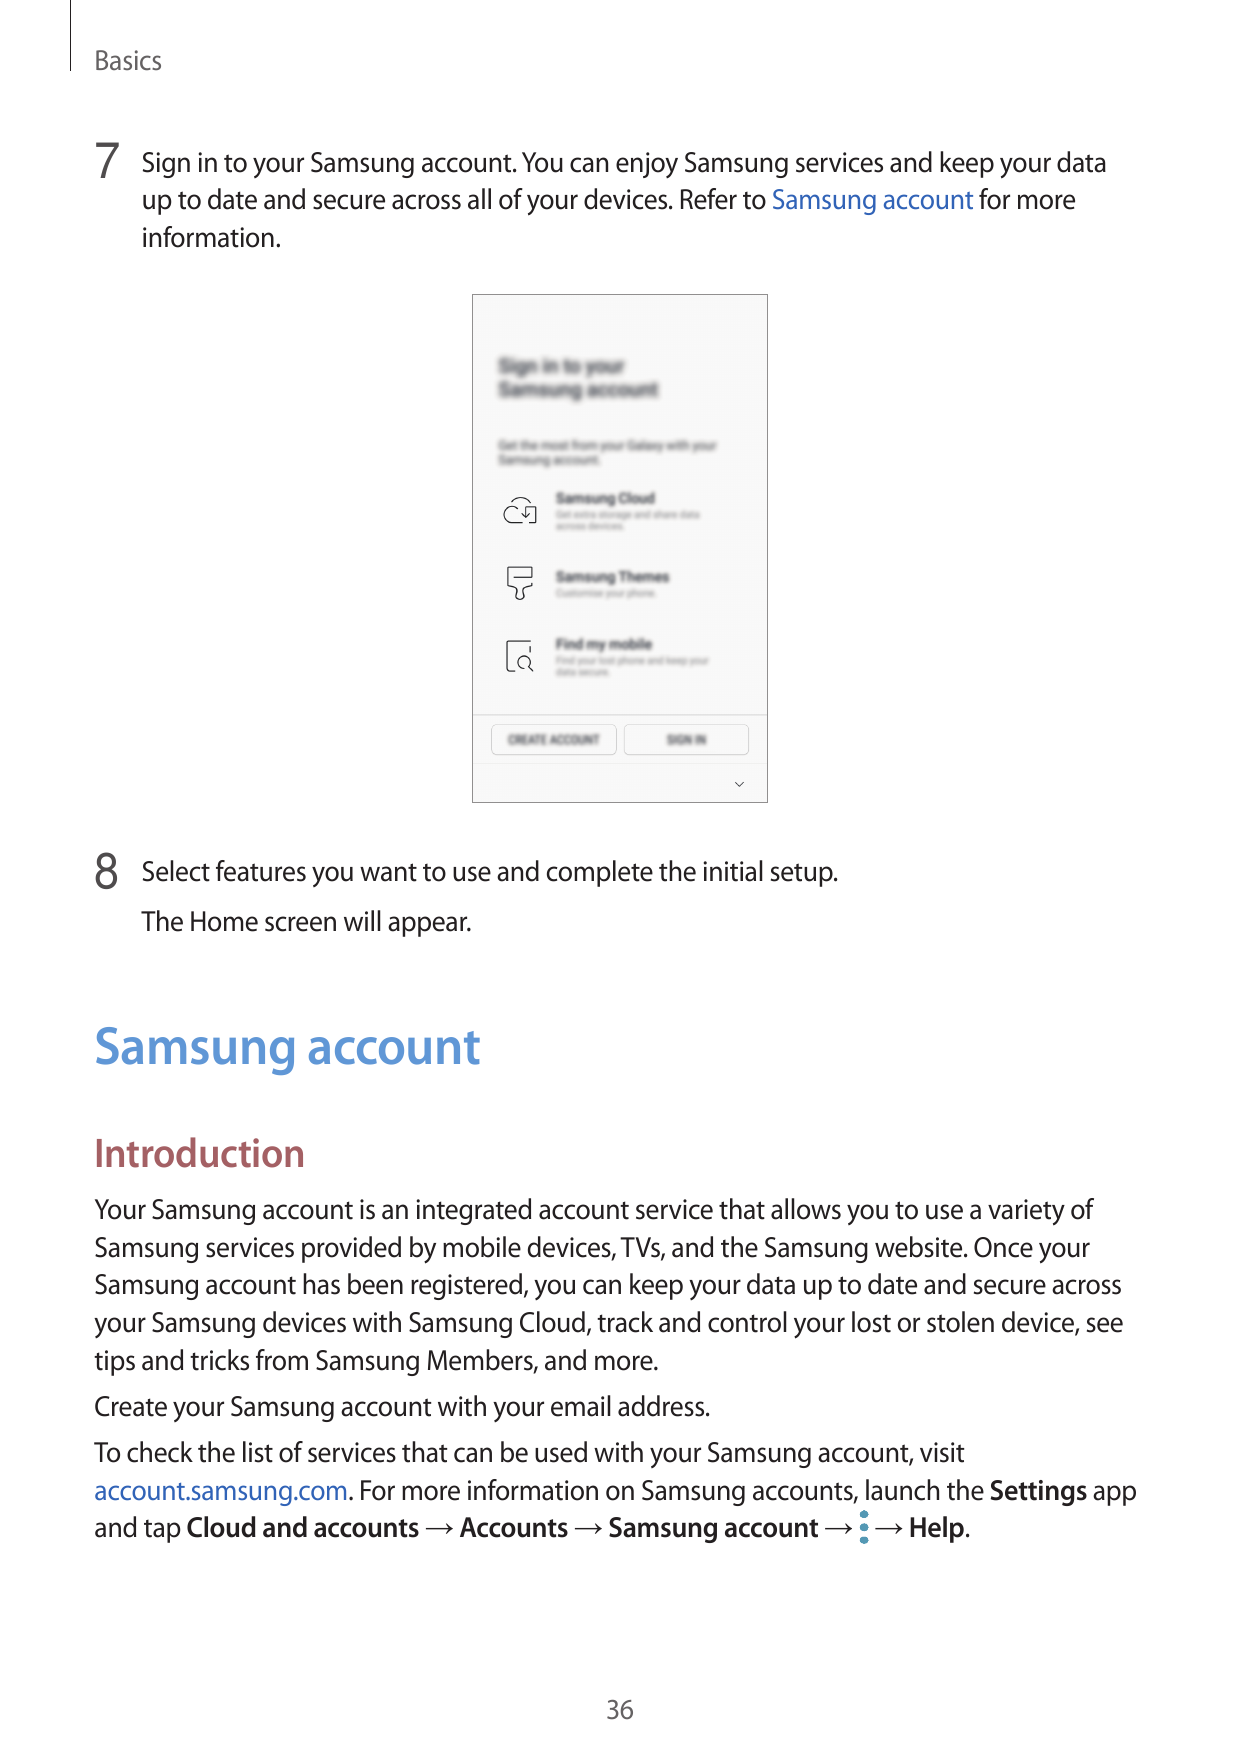 Basics7 Sign in to your Samsung account. You can enjoy Samsung services and keep your dataup to date and secure across all of yo